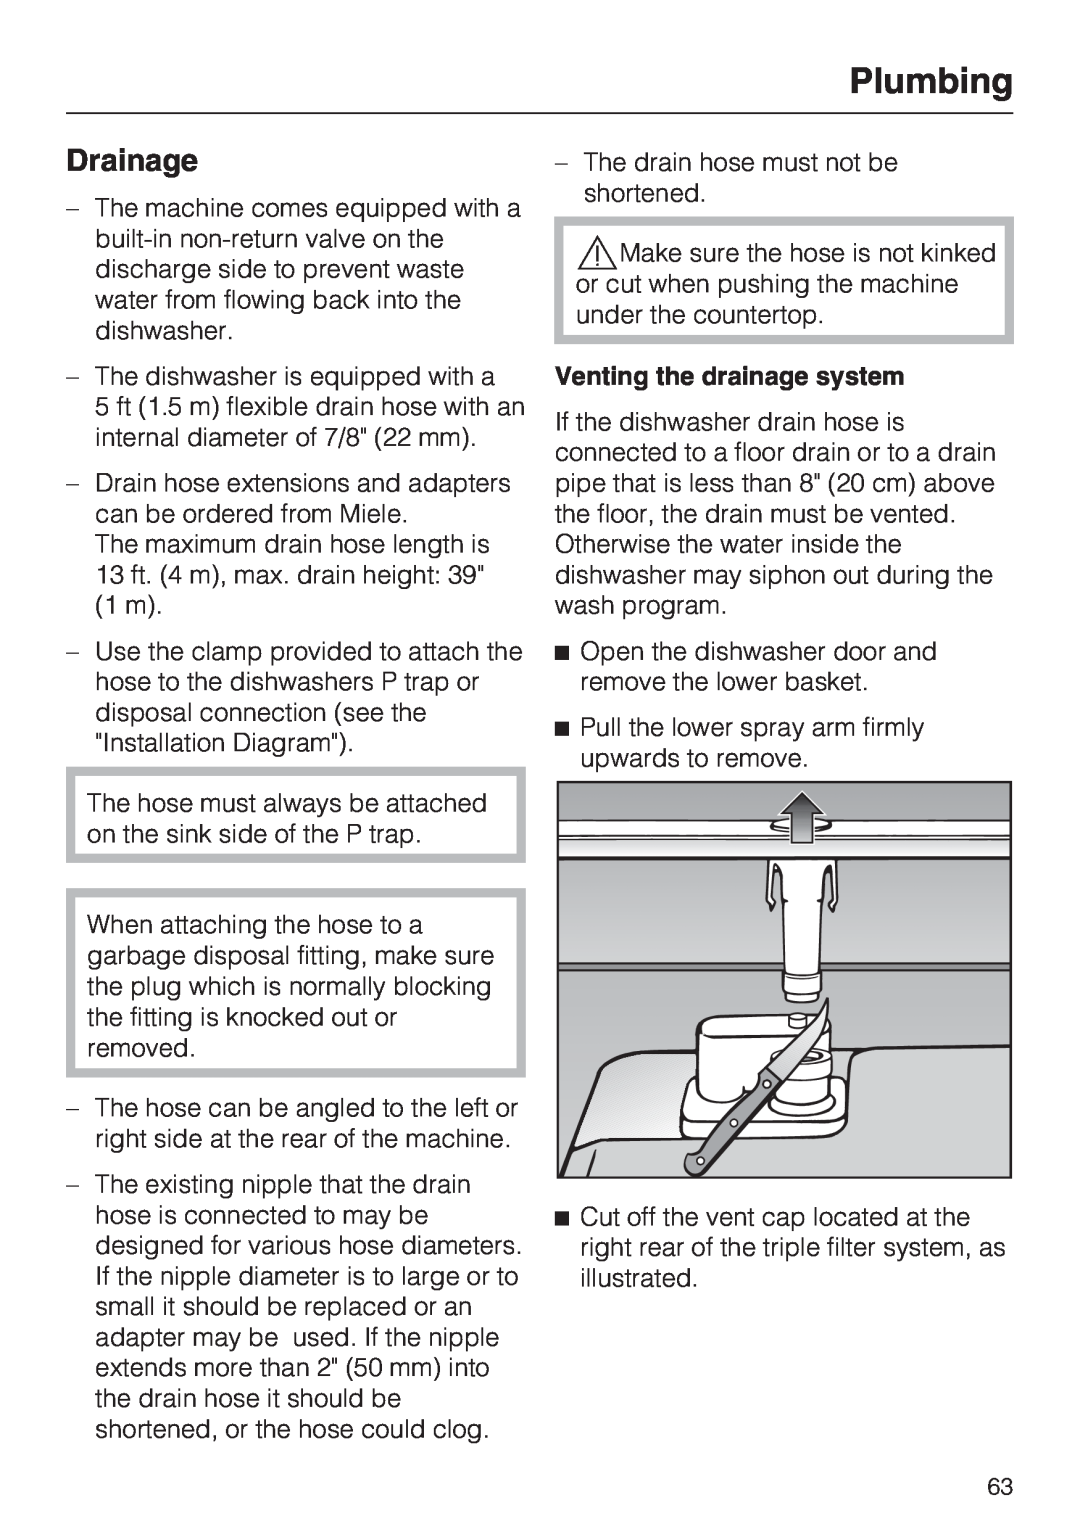 Miele G 5220, G 5225 operating instructions Drainage, Plumbing, Venting the drainage system 